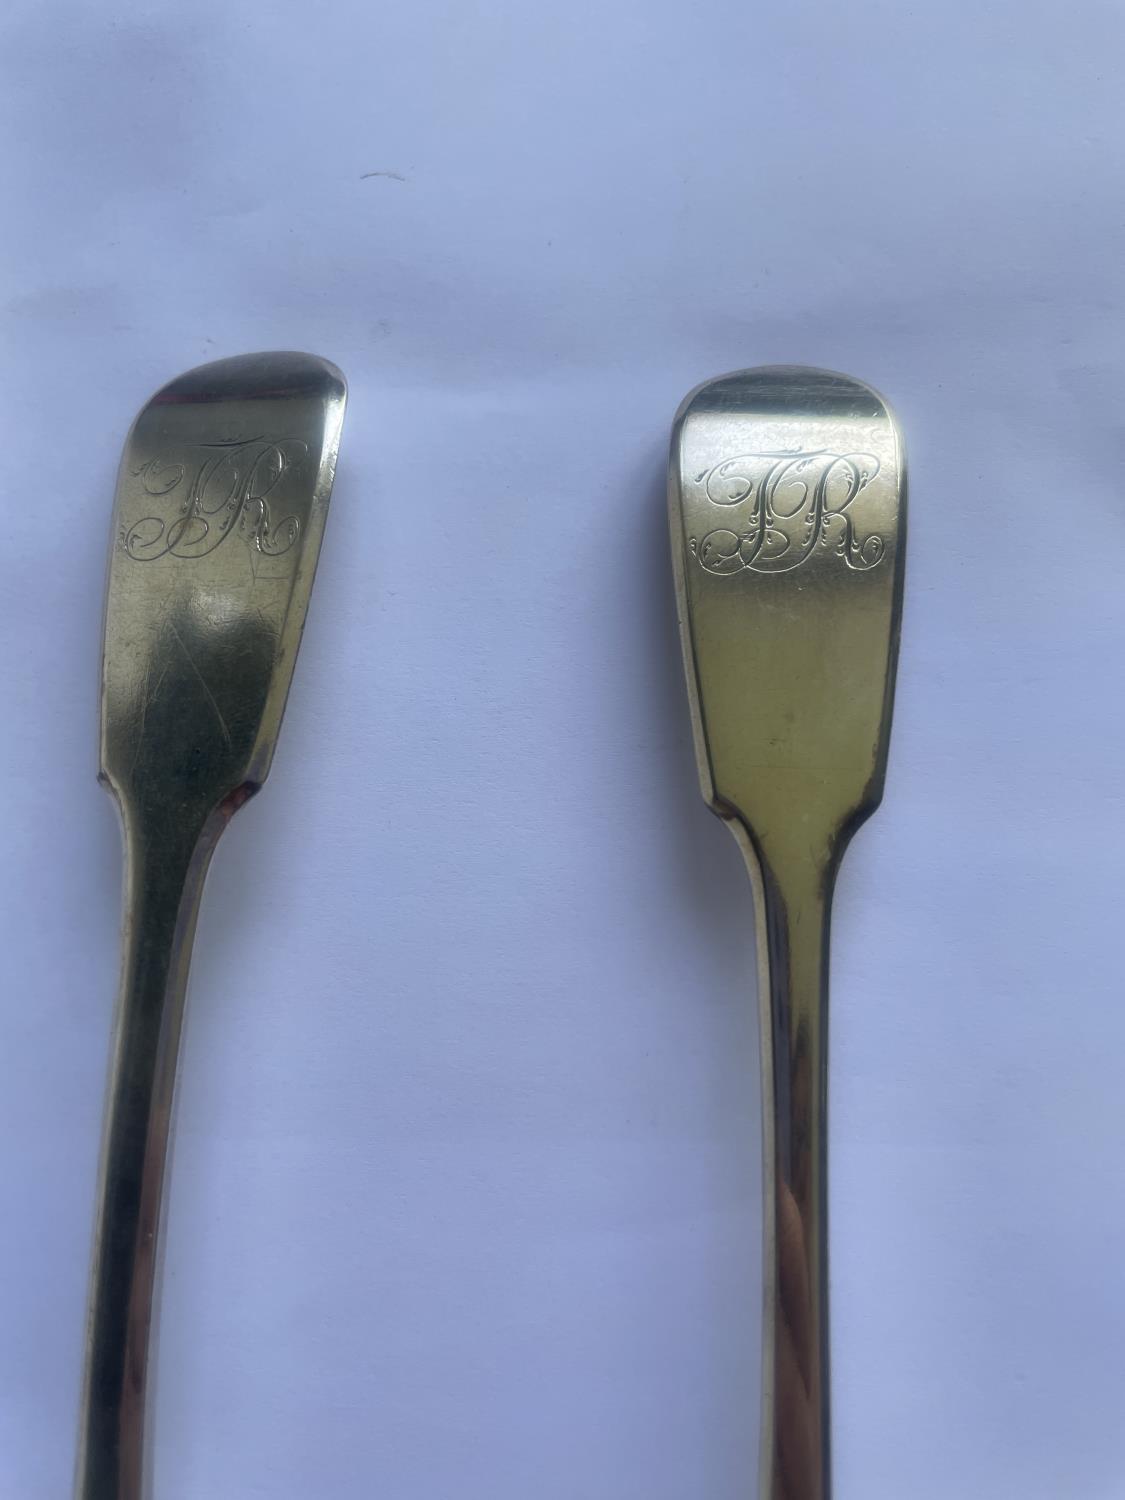 THREE HALLMARKED GEORGIAN SILVER SERVING SPOONS GROSS WEIGHT 256 GRAMS - Image 2 of 5